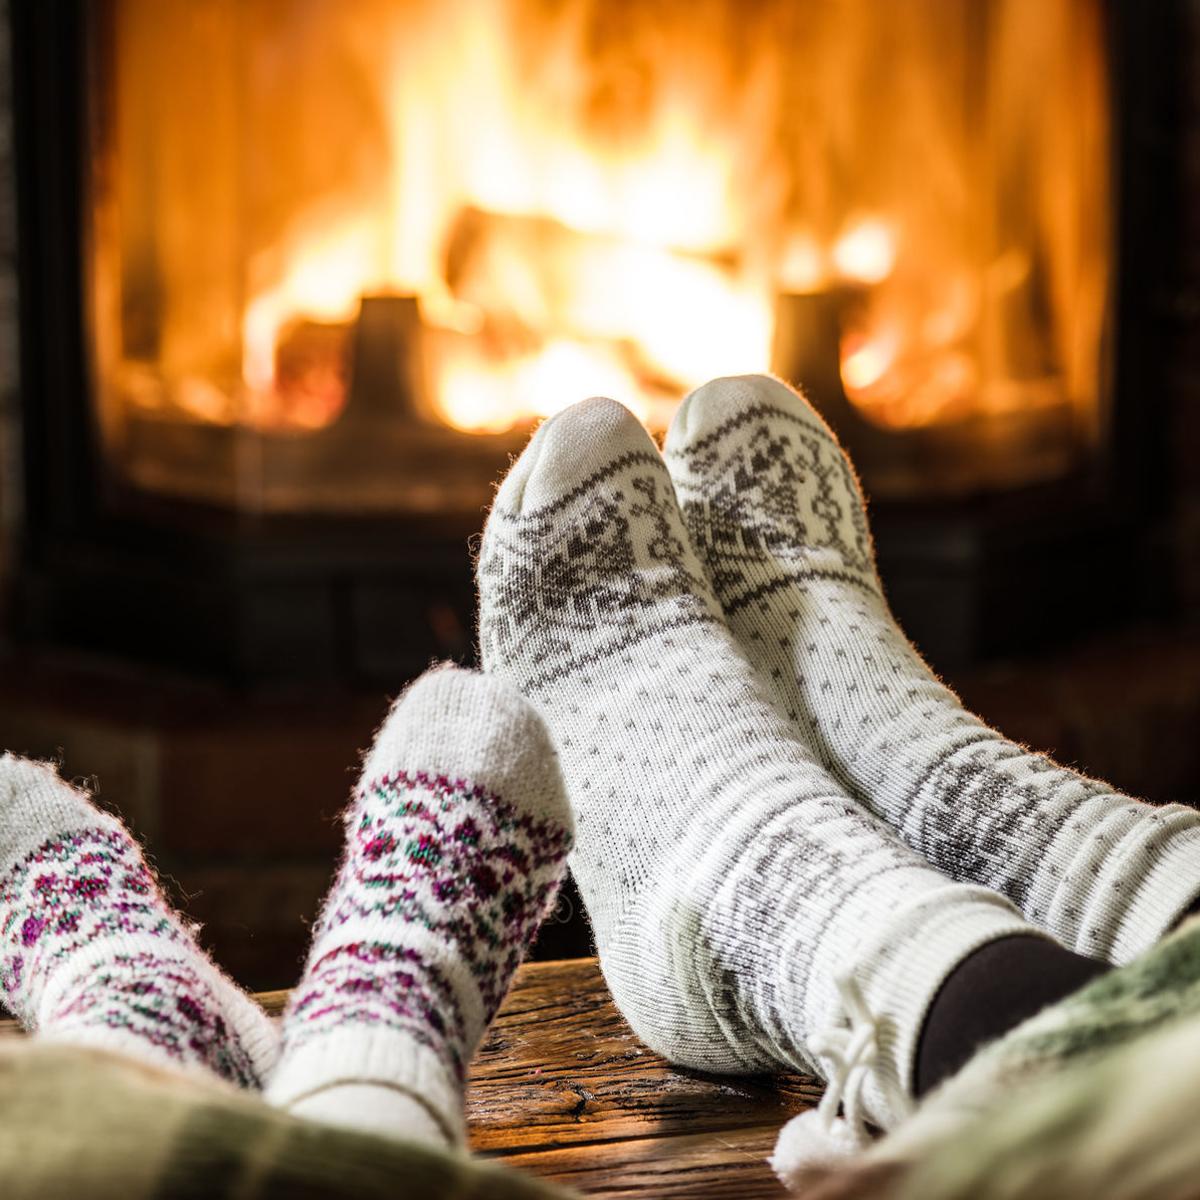 Fireplace Fix New Keep the Heat Simple Ways to Warm Your Home This Winter